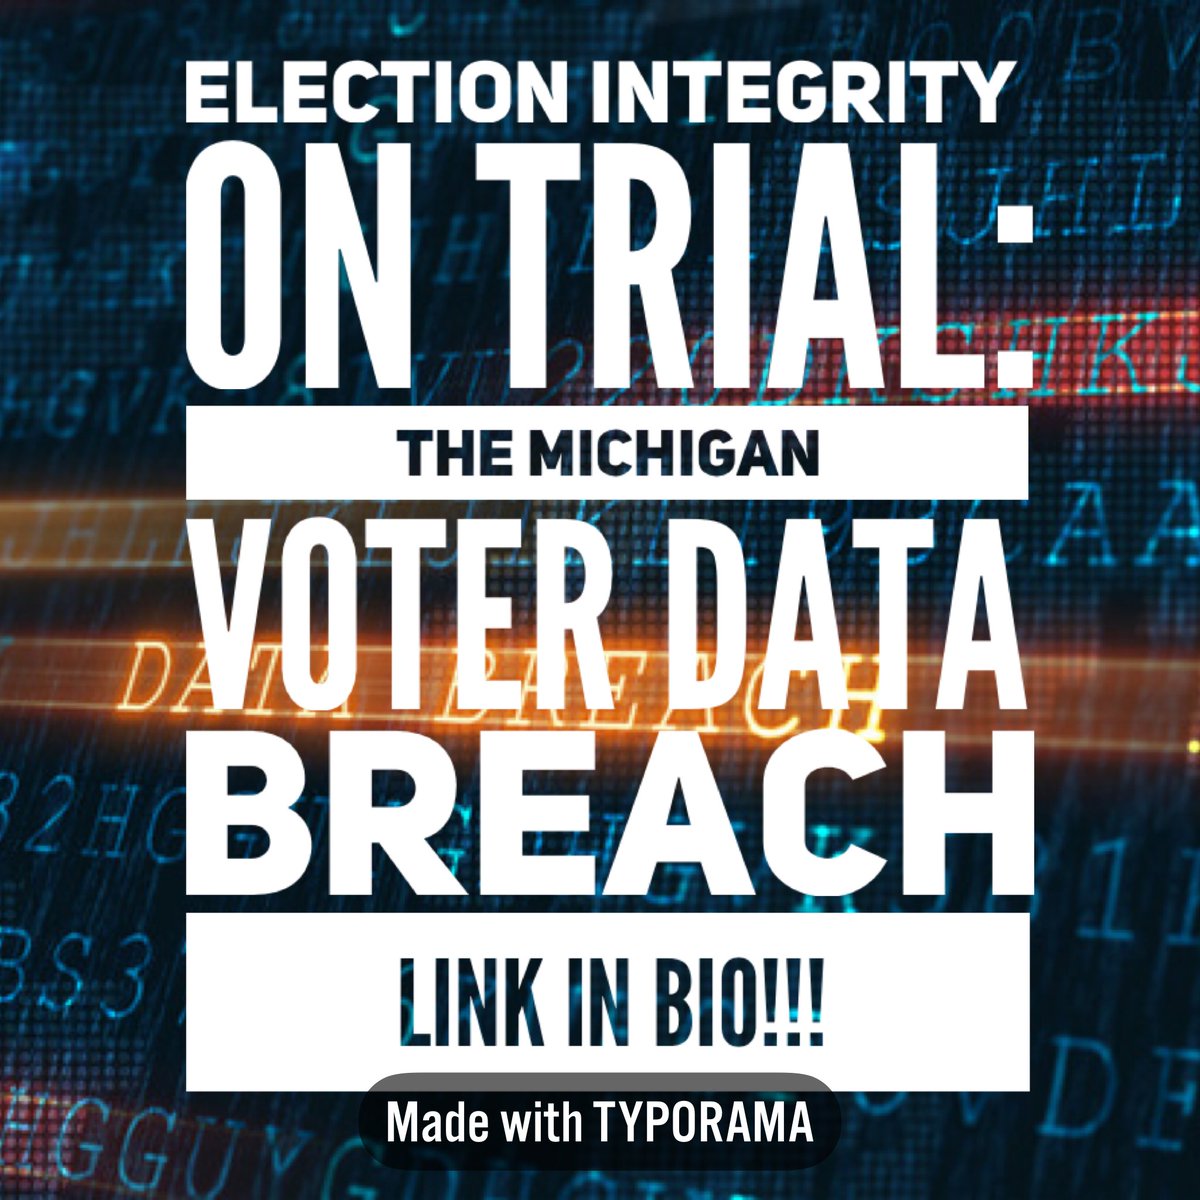 LIKE, COMMENT, SUBSCRIBE & SHARE!!!

#VoterDataBreach #Politics #DataSecurity #PrivacyMatters #ElectionIntegrity #VoterRights #PoliticalPrivacy #CyberSecurity #ConstitutionalRights #VoteProtection #PoliticalDataSecrecy #teamtaytay🇧🇧